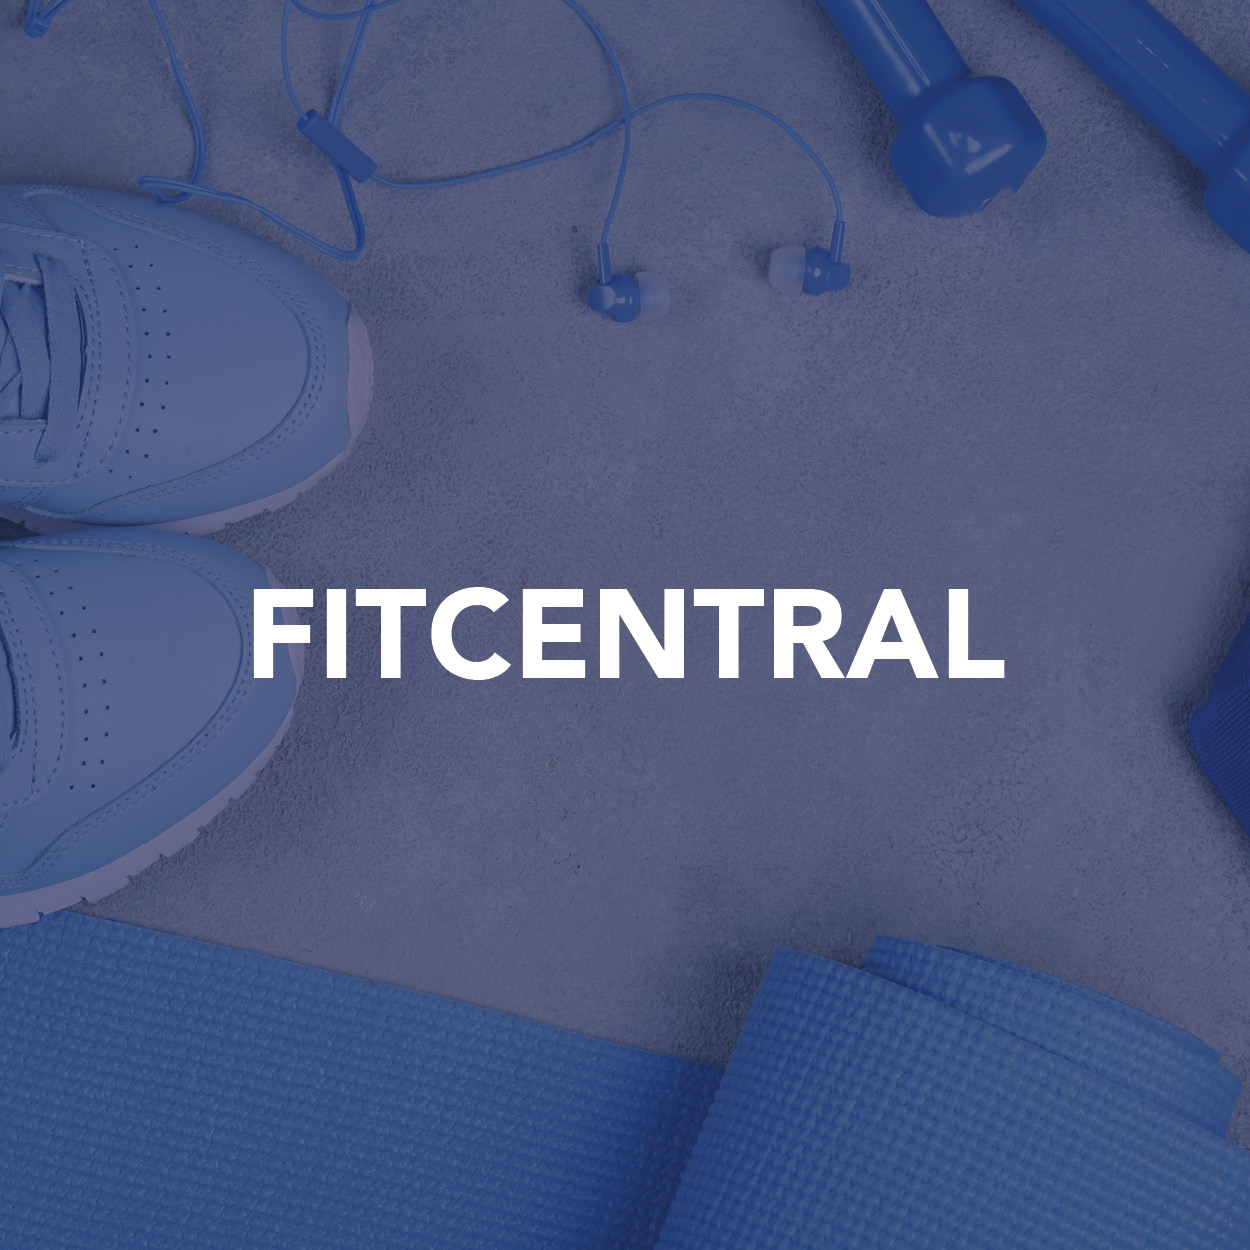 FitCentral